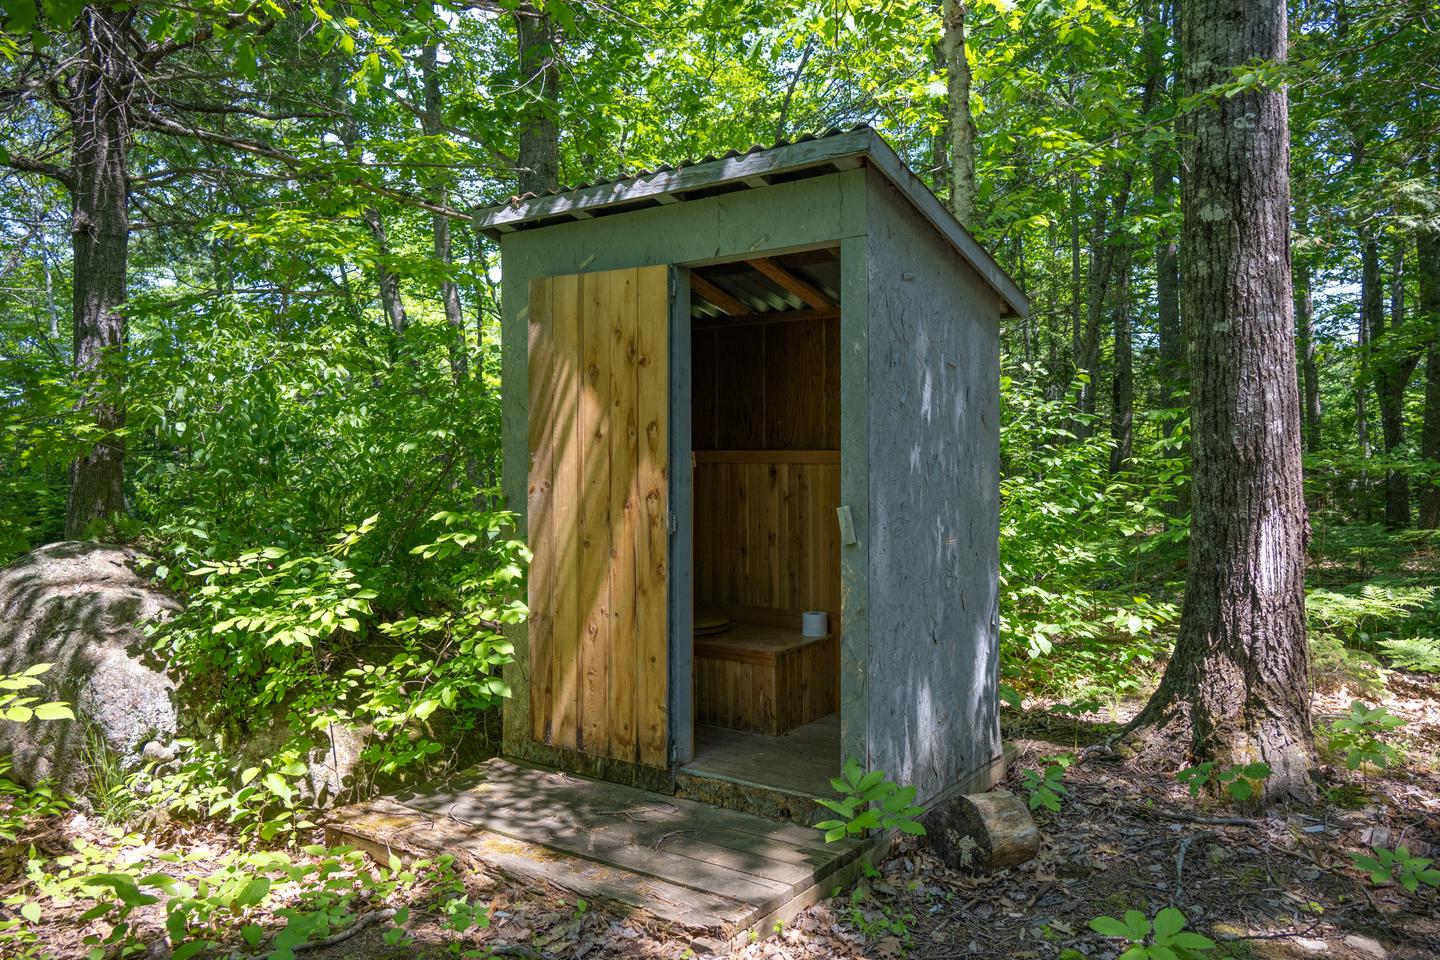 A wooden pit toilet structure at the campsite with the door open on a sunny day.A pit toilet is located at the campsite.